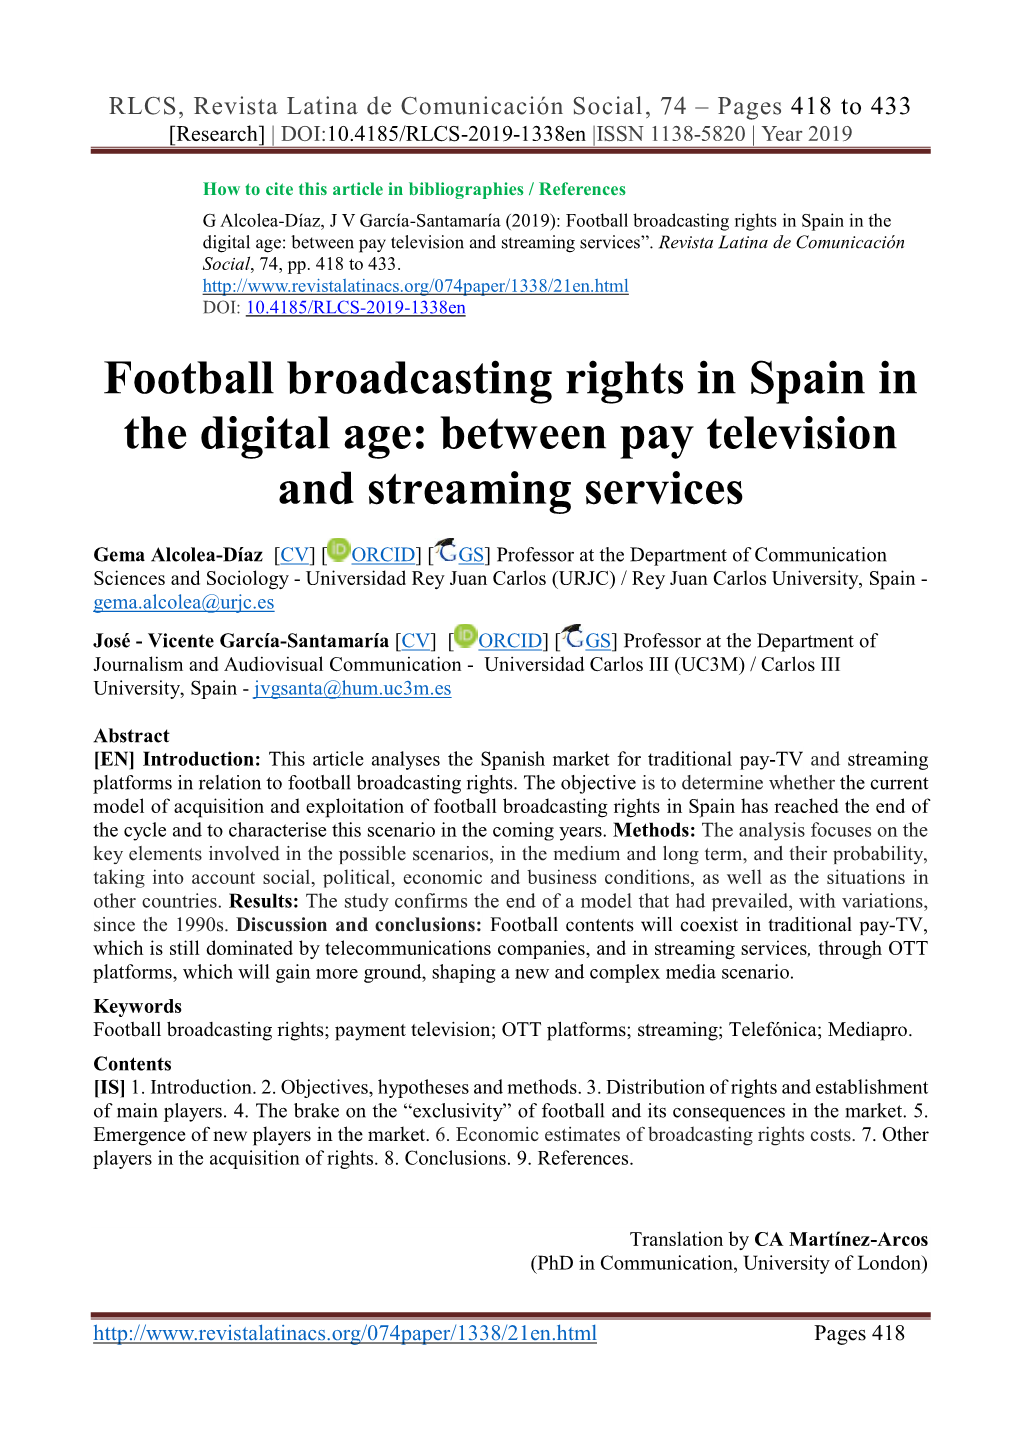 Football Broadcasting Rights in Spain in the Digital Age: Between Pay Television and Streaming Services”